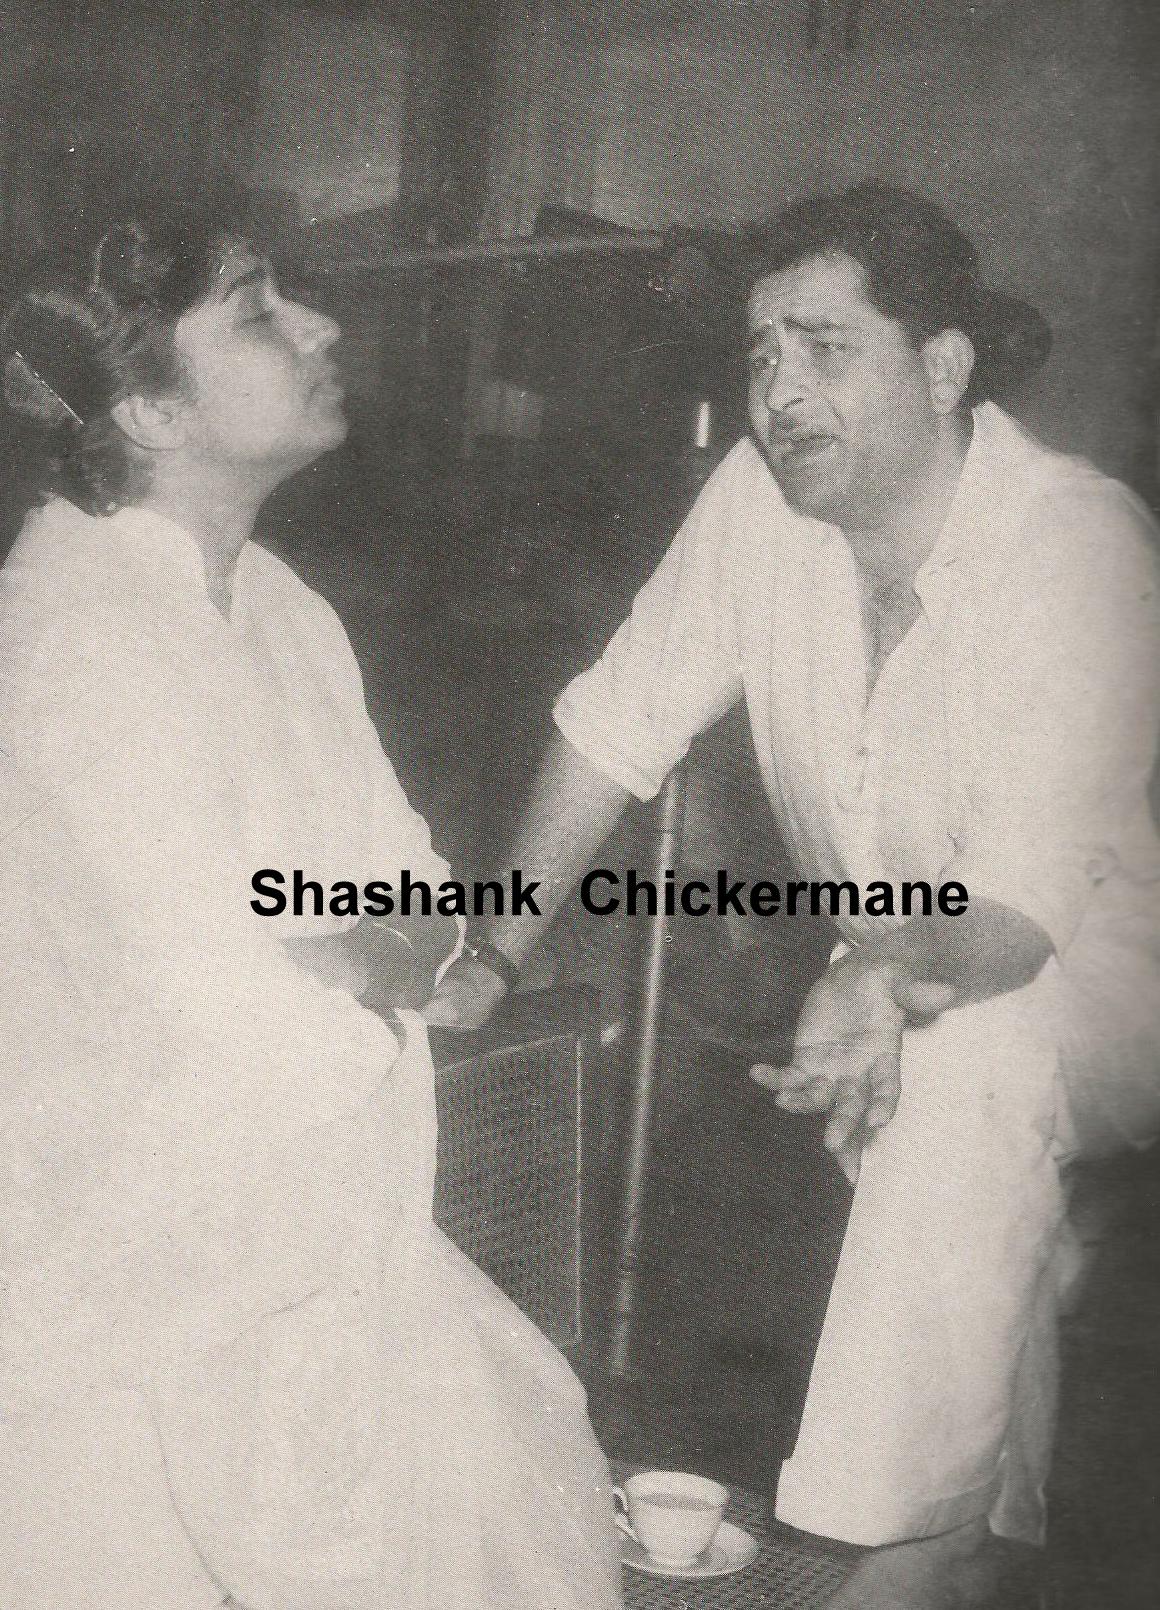 Lata with Raj Kapoor rehearsals a song in the recording studio